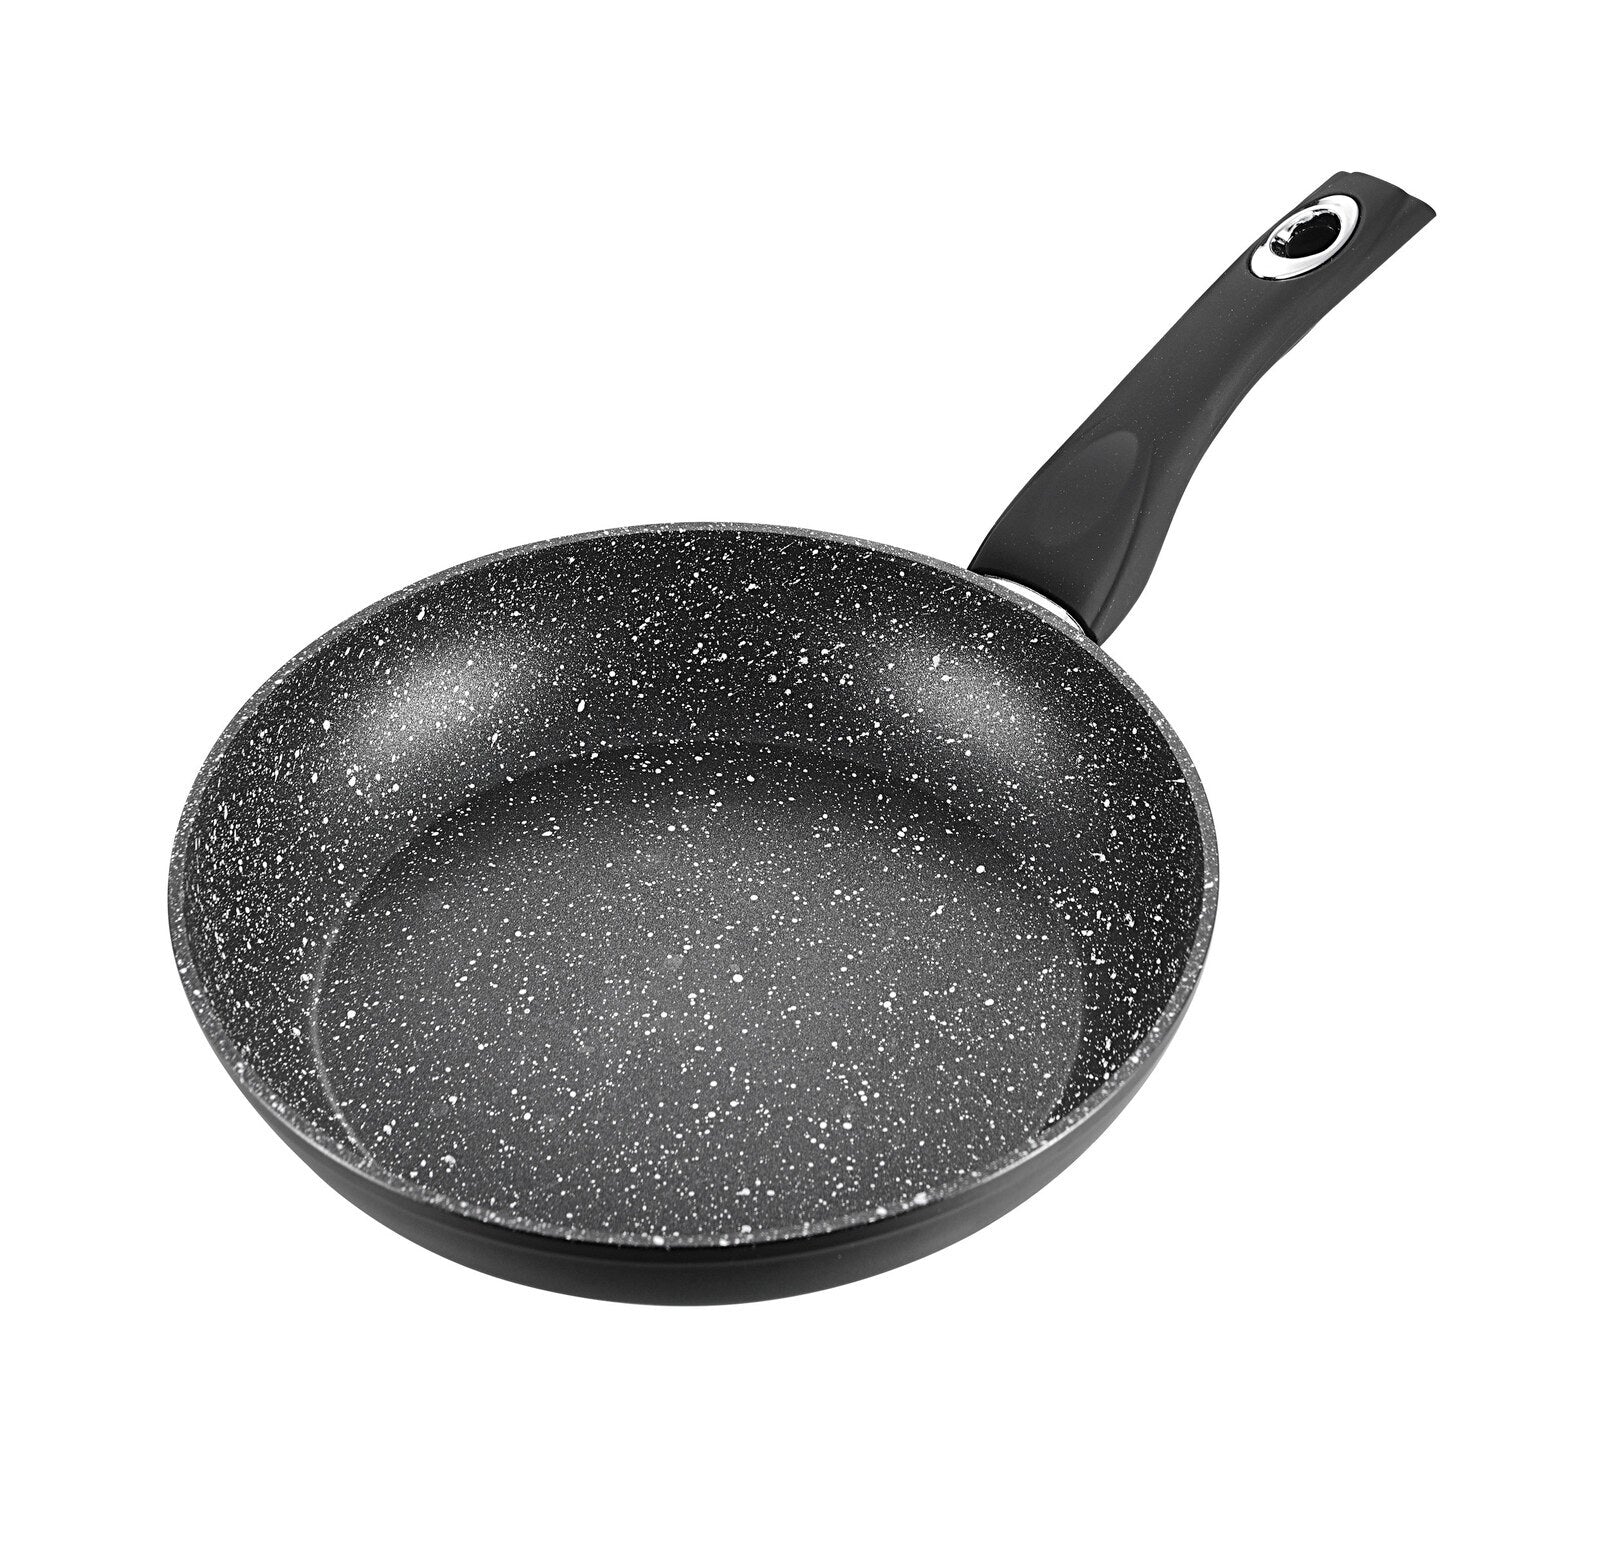 3-Piece Forged Frypan Set with Non-stick Coating - 0